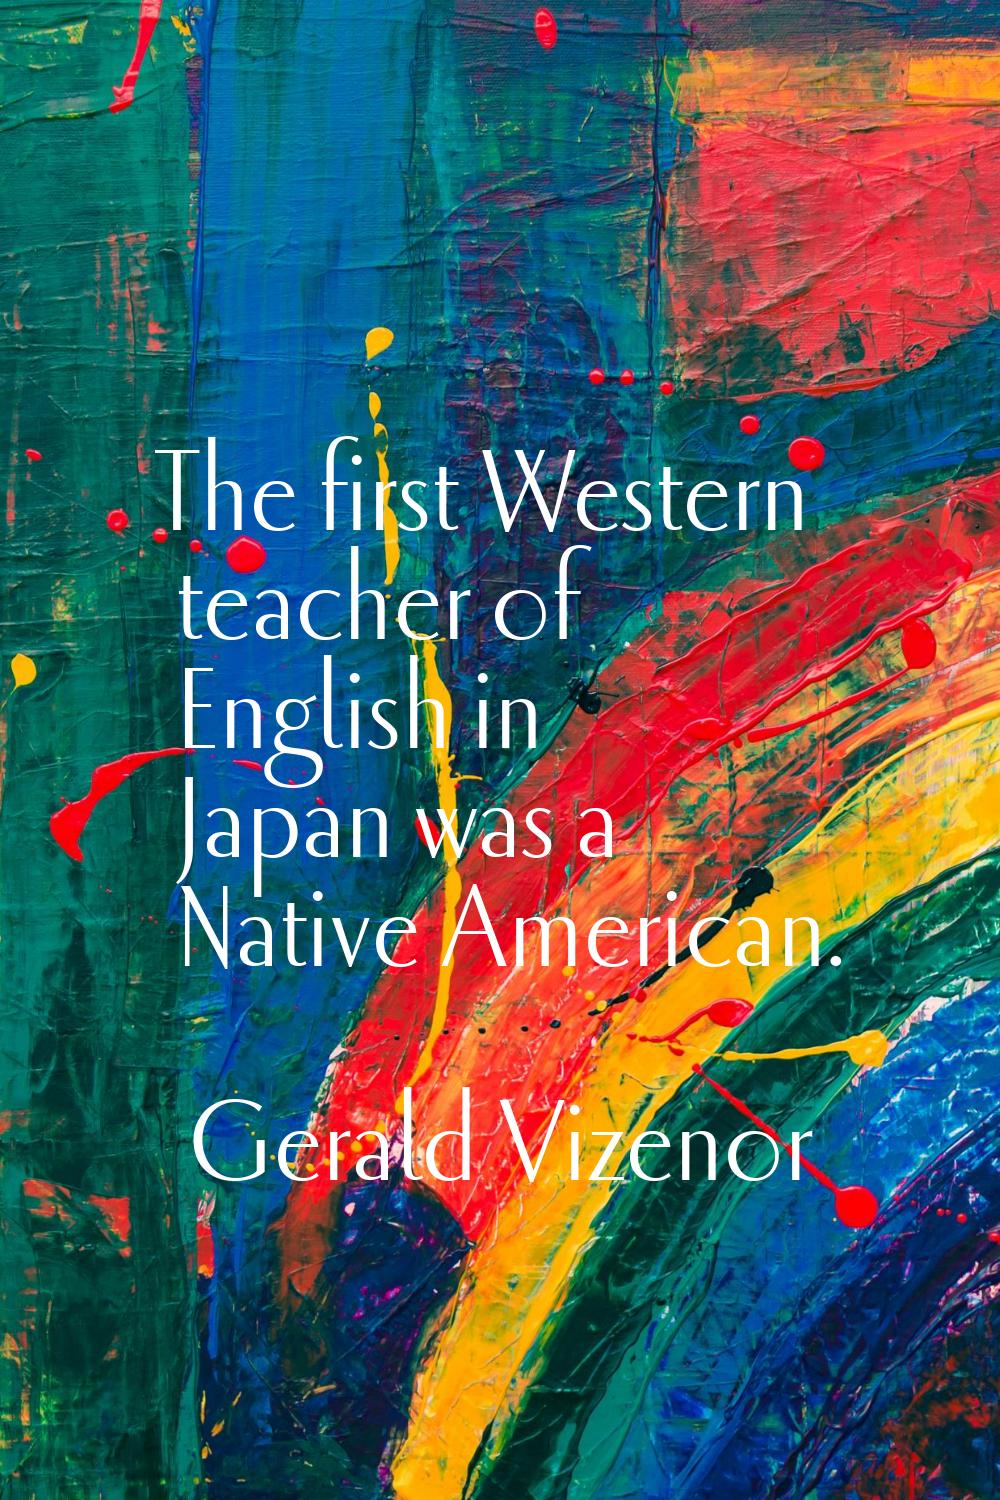 The first Western teacher of English in Japan was a Native American.